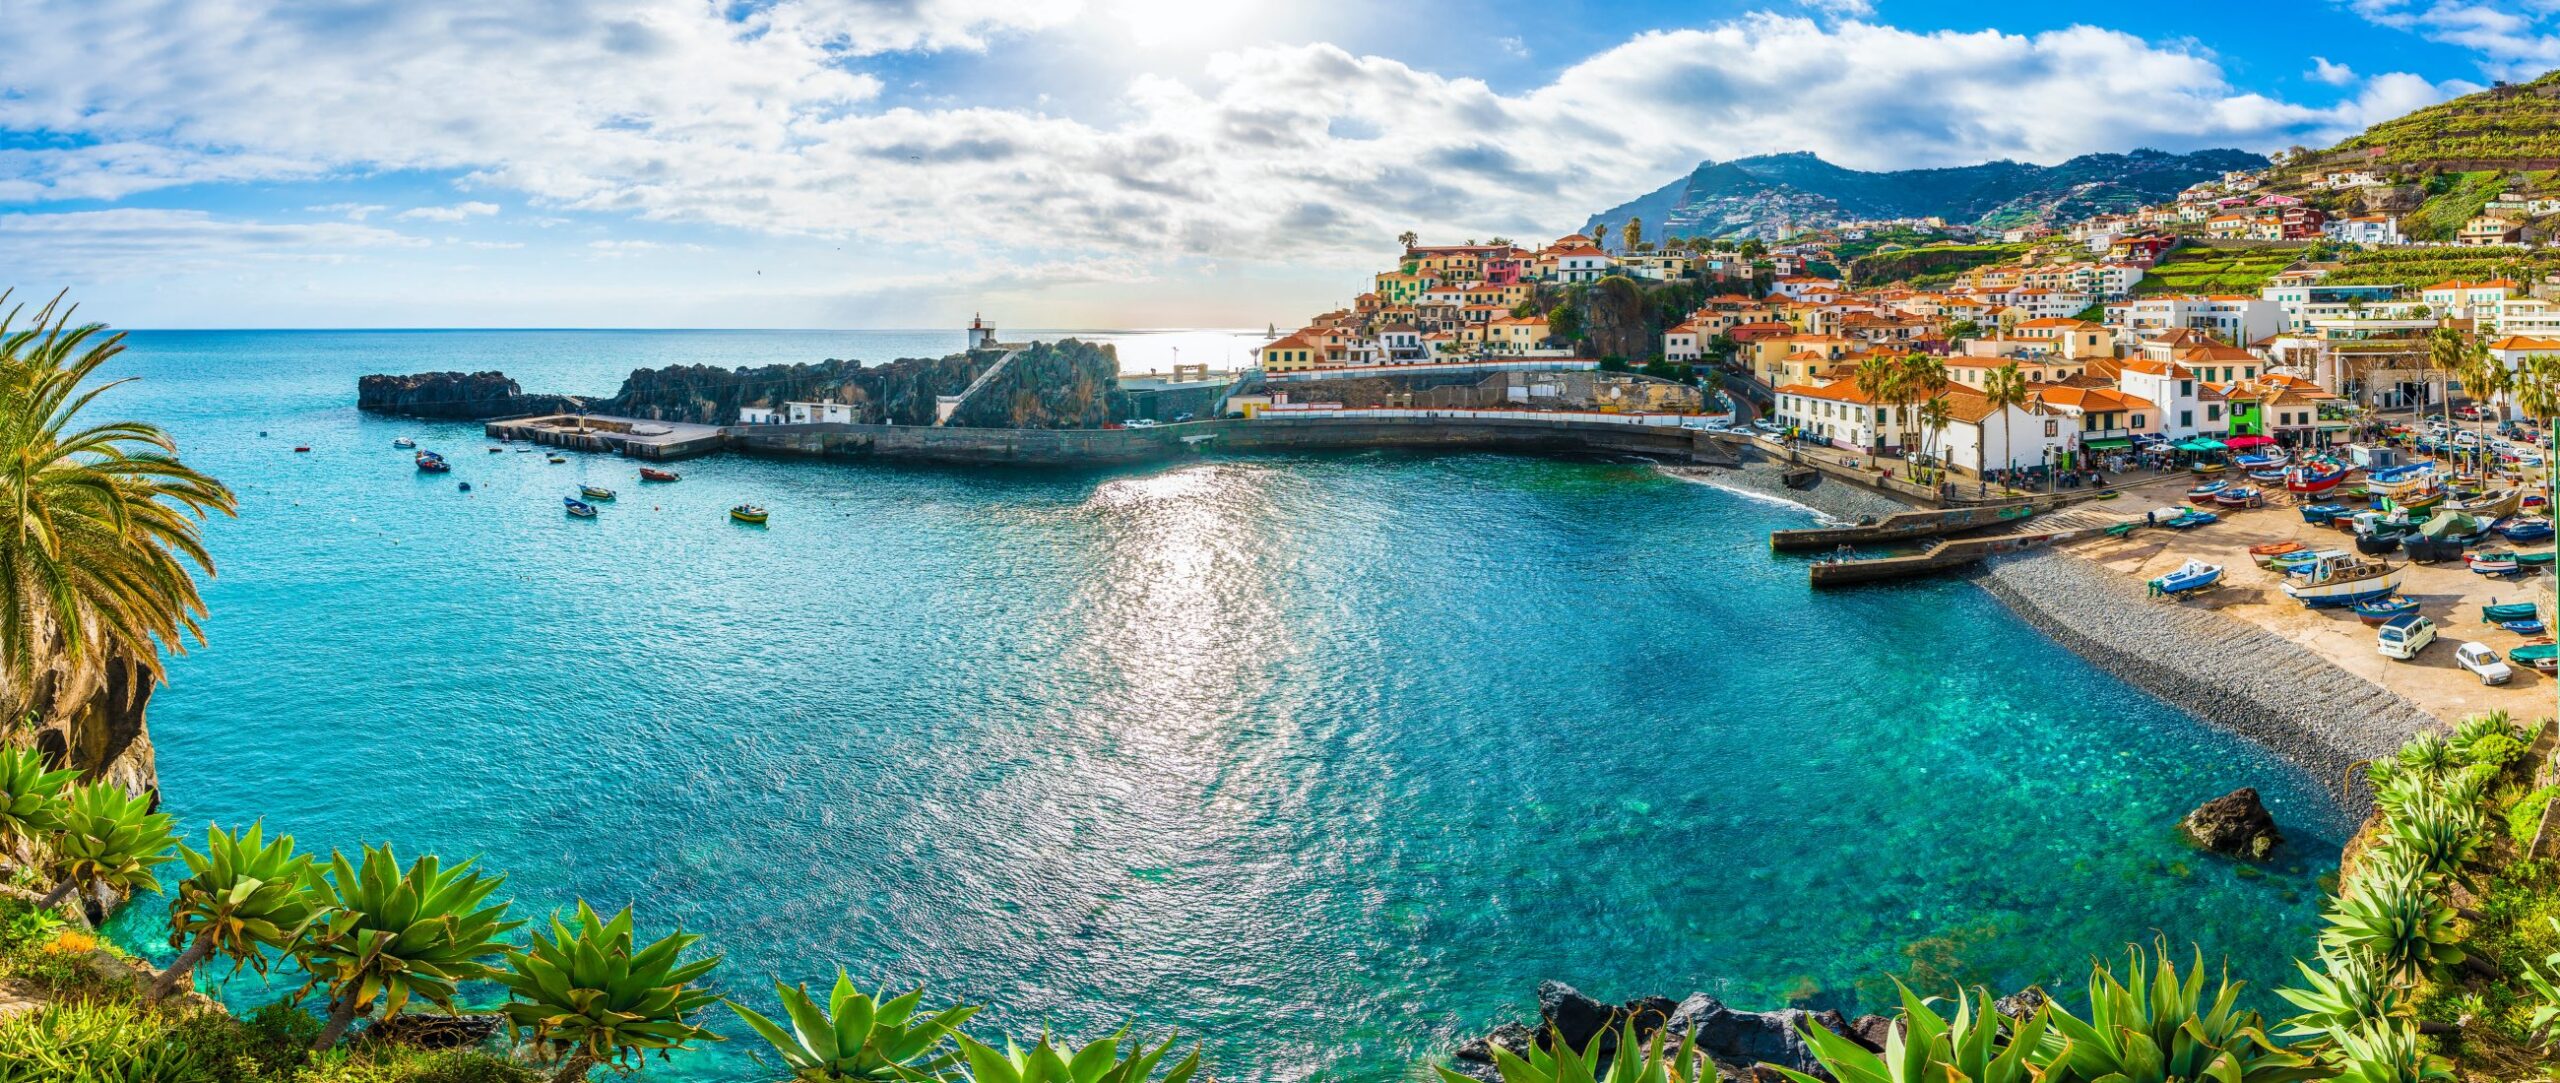 Madeira: The Island That Belongs To All - Best Things To Do